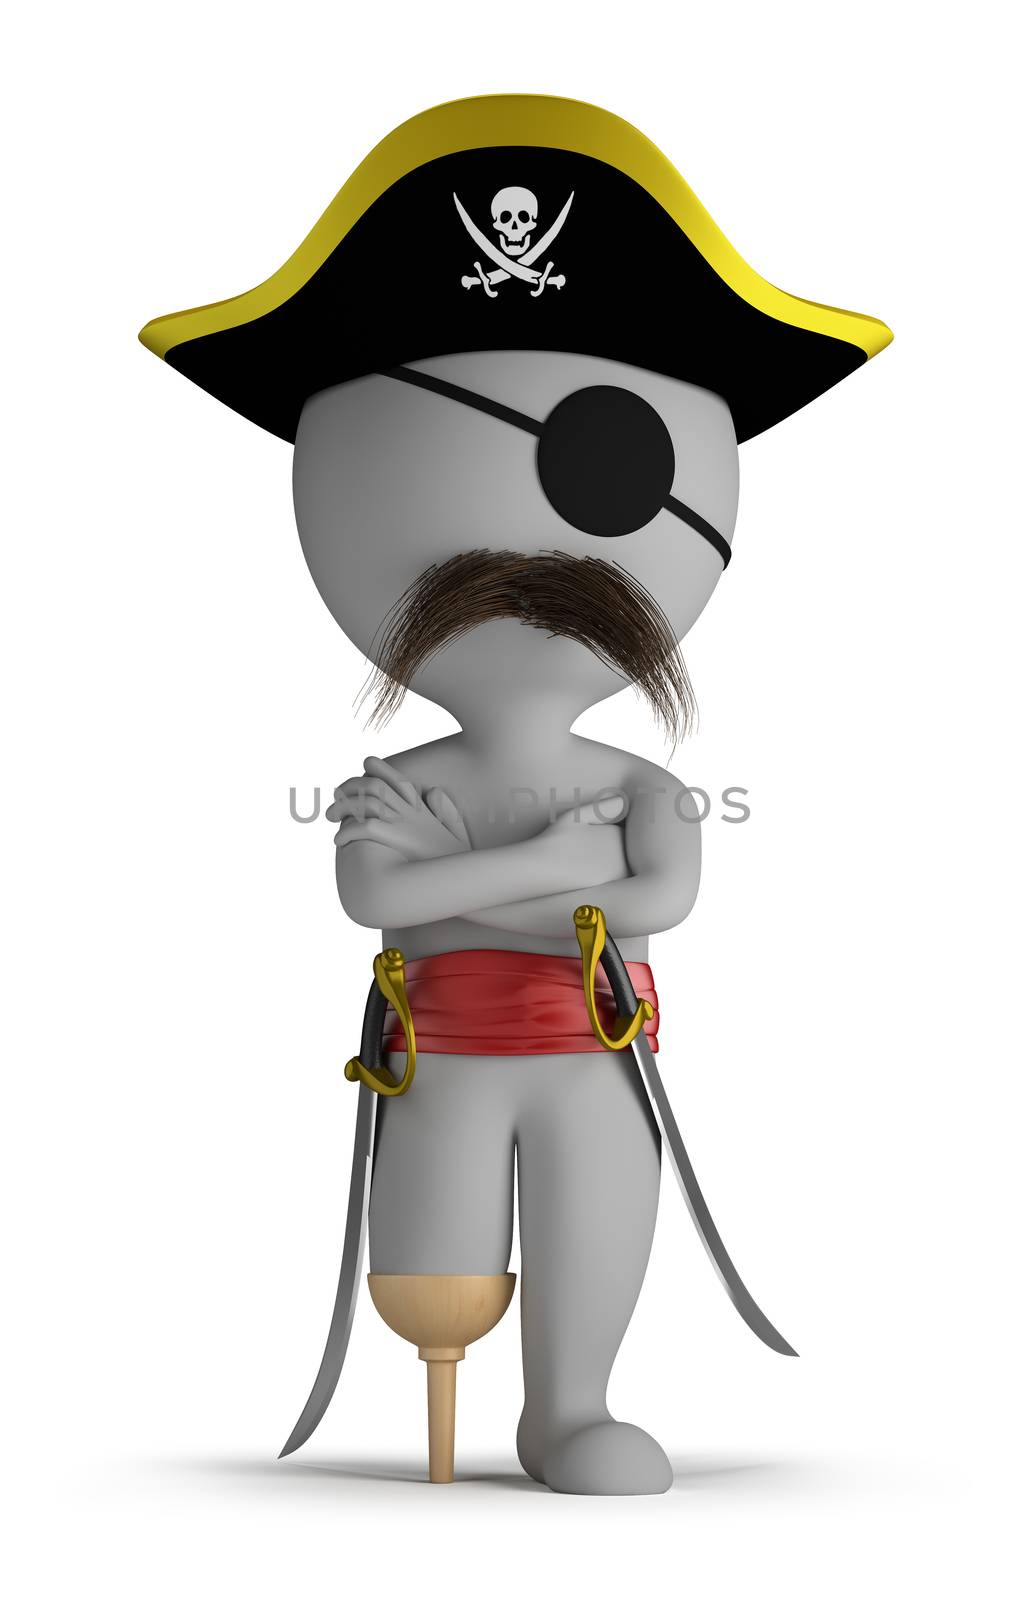 3d small person - one-legged pirate hat, and with swords. 3d image. Isolated white background.